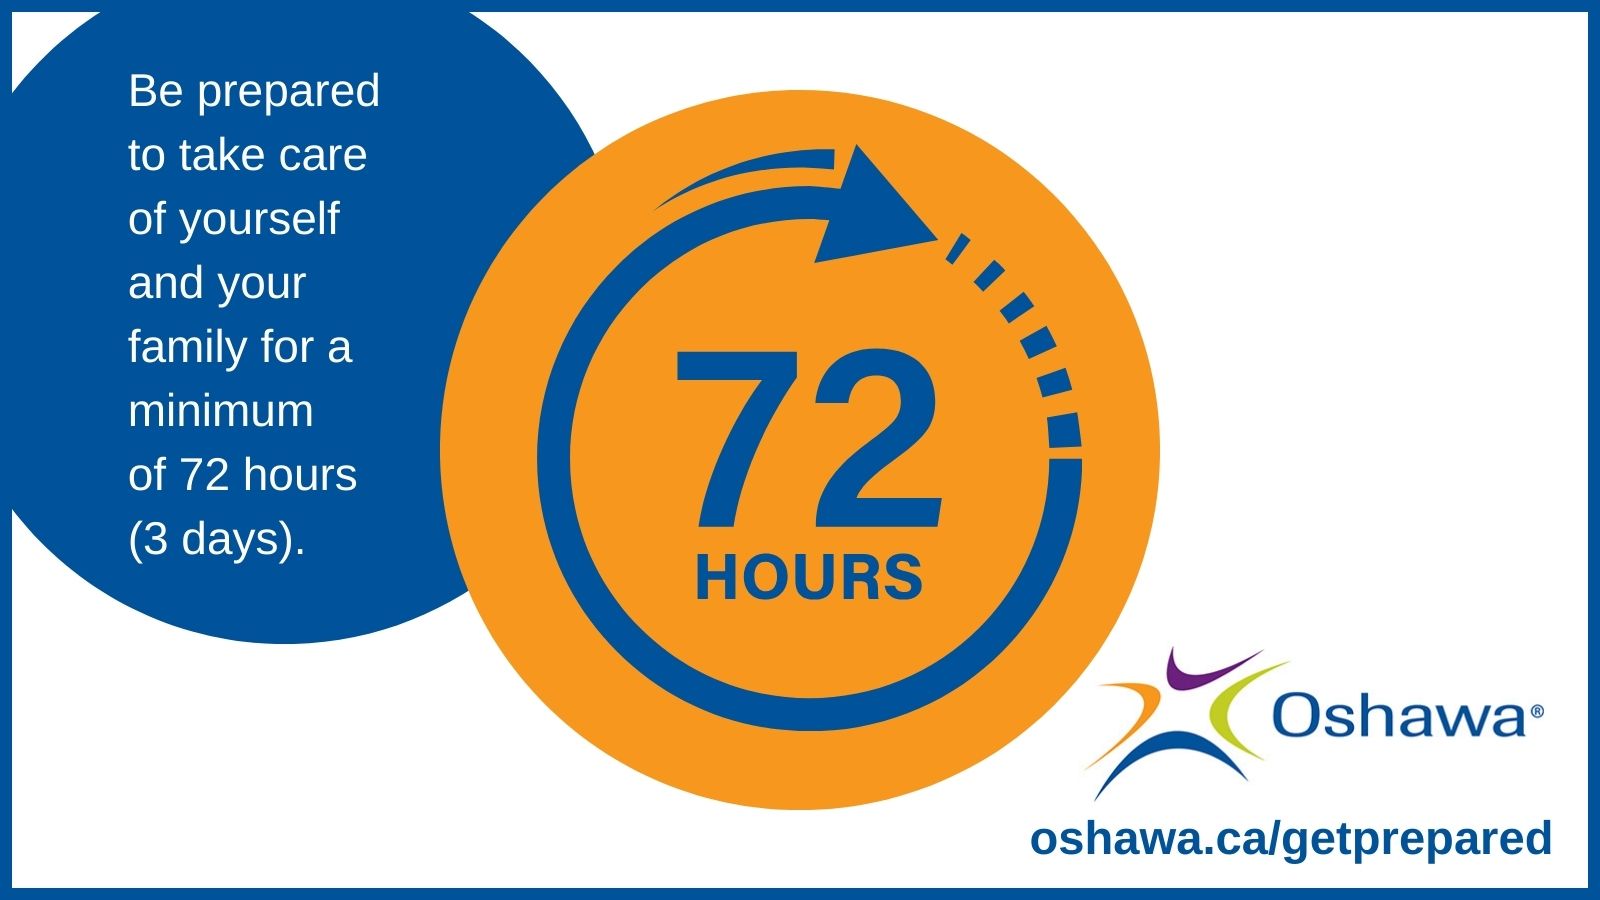 Two circles, one blue and one gold. Blue arrow going in a circle with 72 hours in the centre. Oshawa logo and Oshawa.ca/getprepared